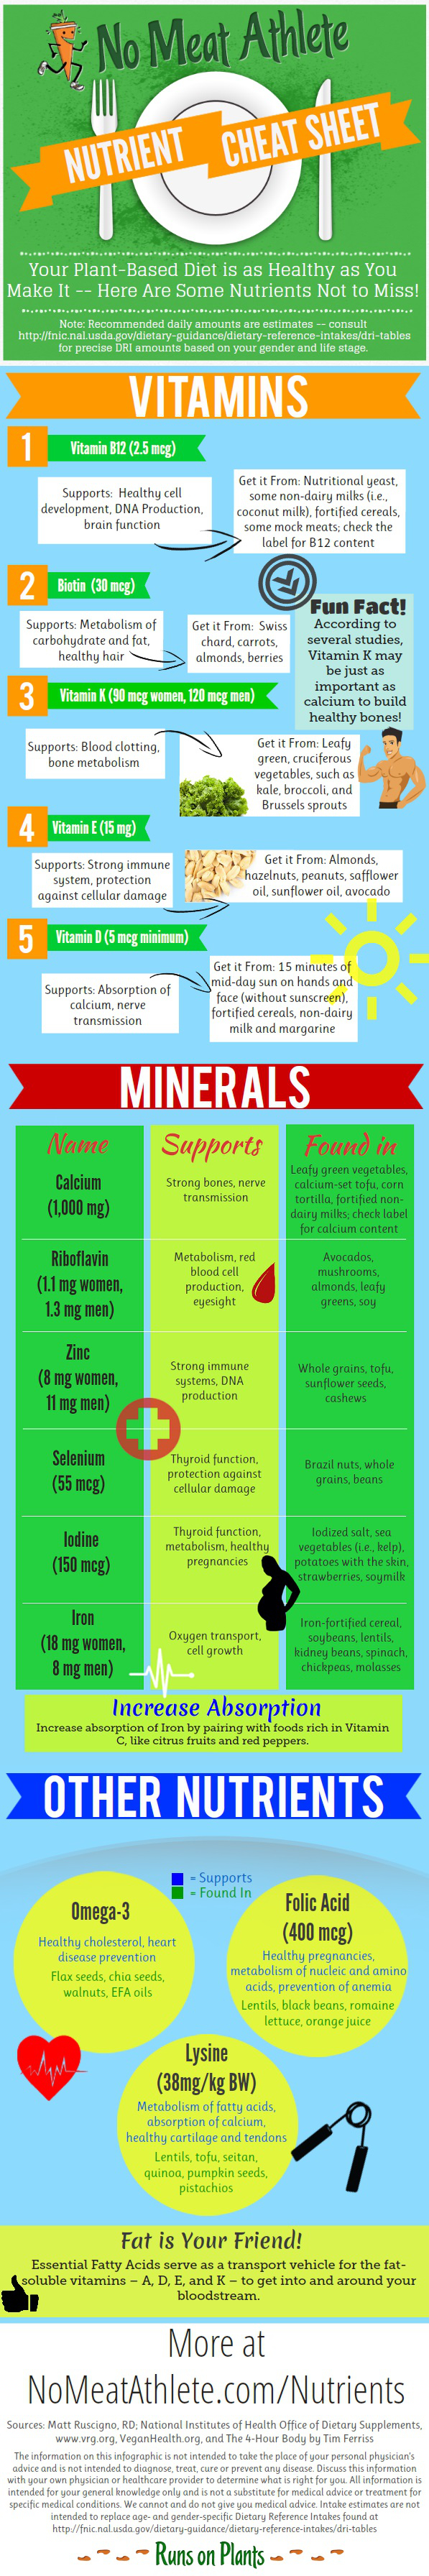 No Meat Athlete Nutrient Cheat Sheet